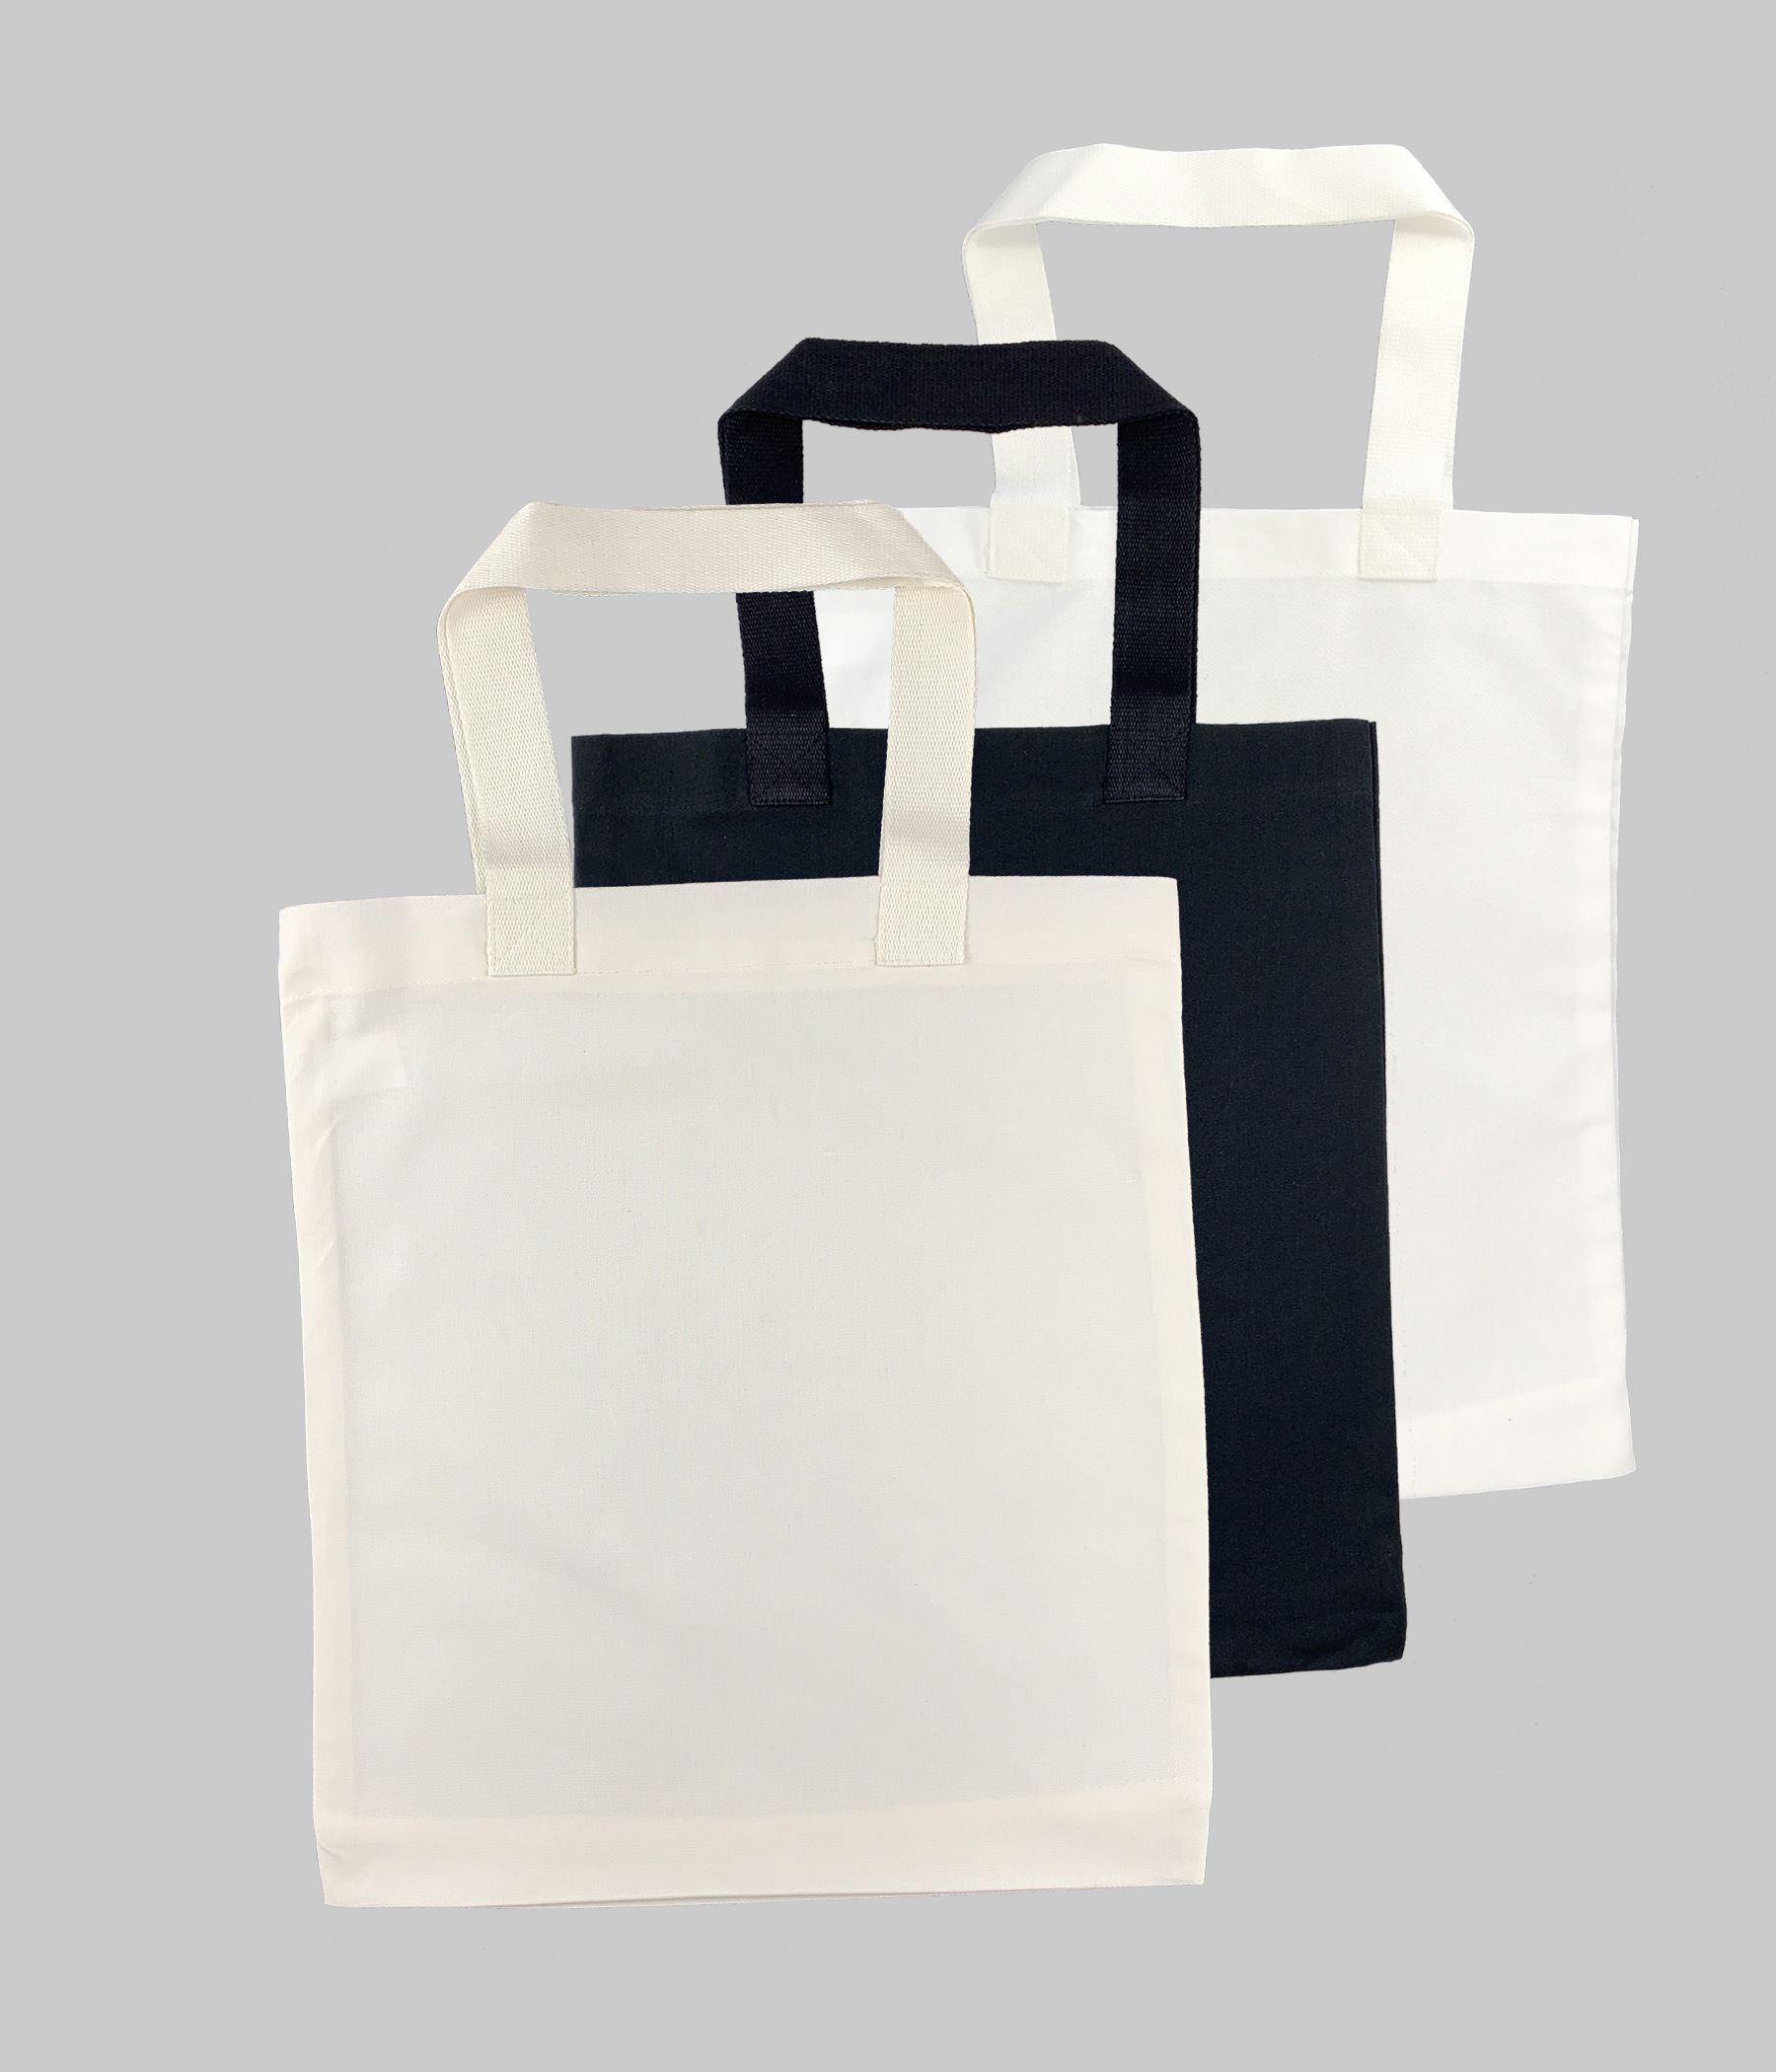 Tote bags category image